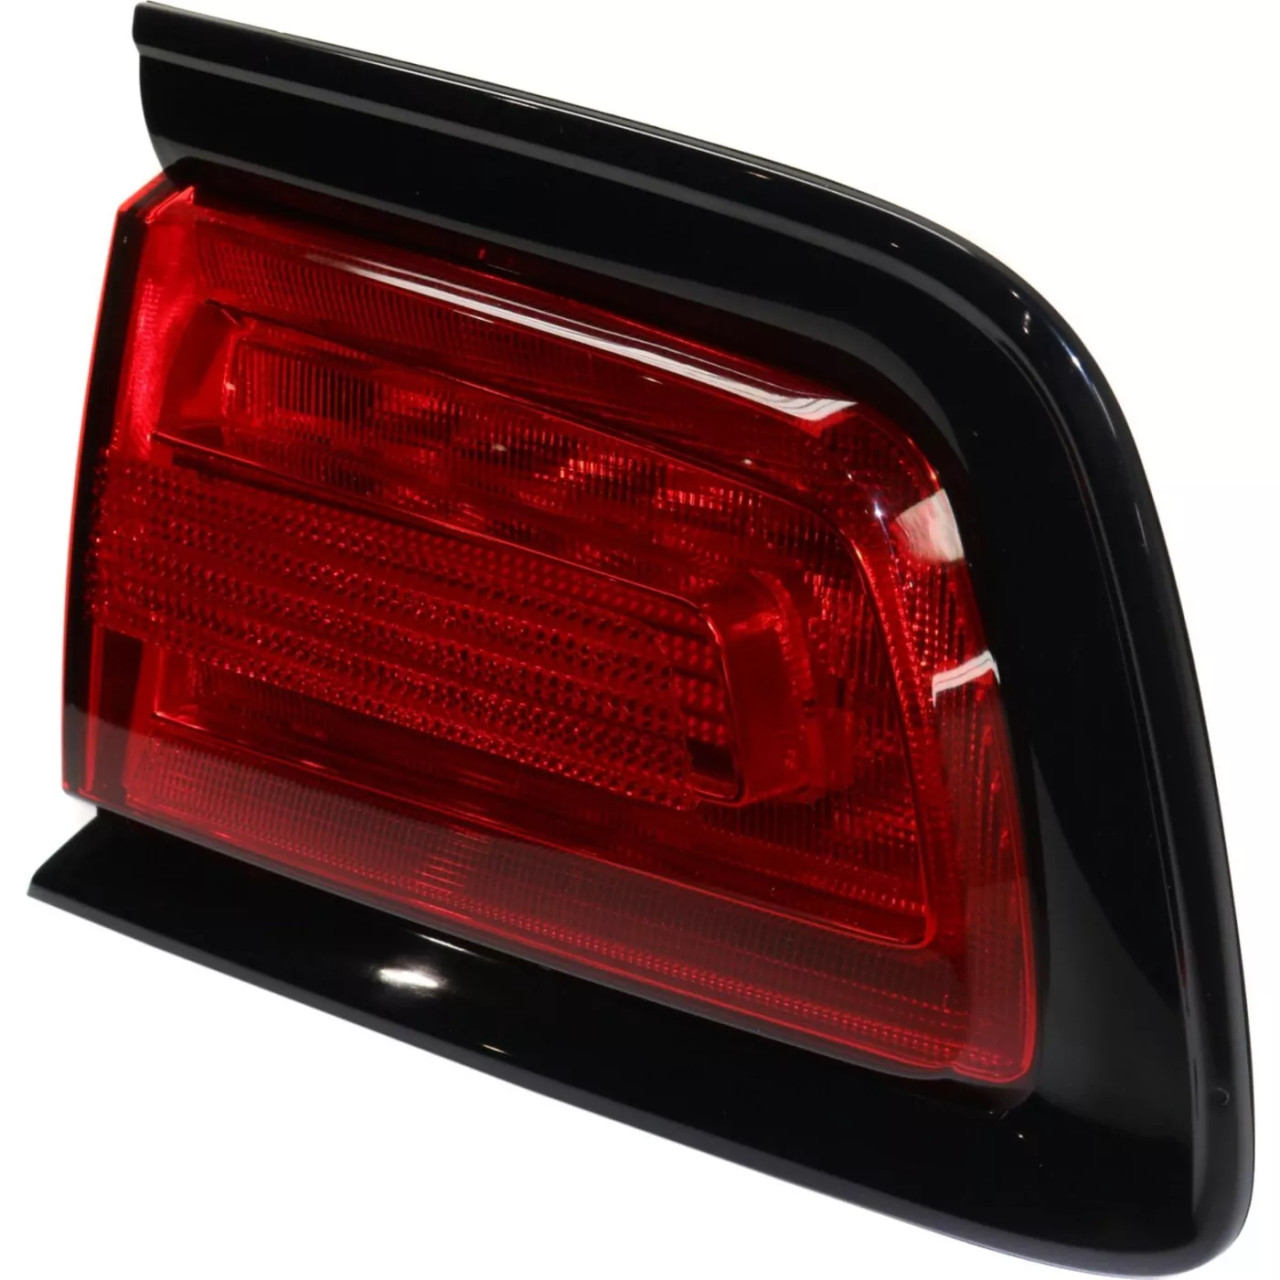 Tail Light For 2011-2014 Dodge Charger Set of 2 Left and Right Outer CAPA